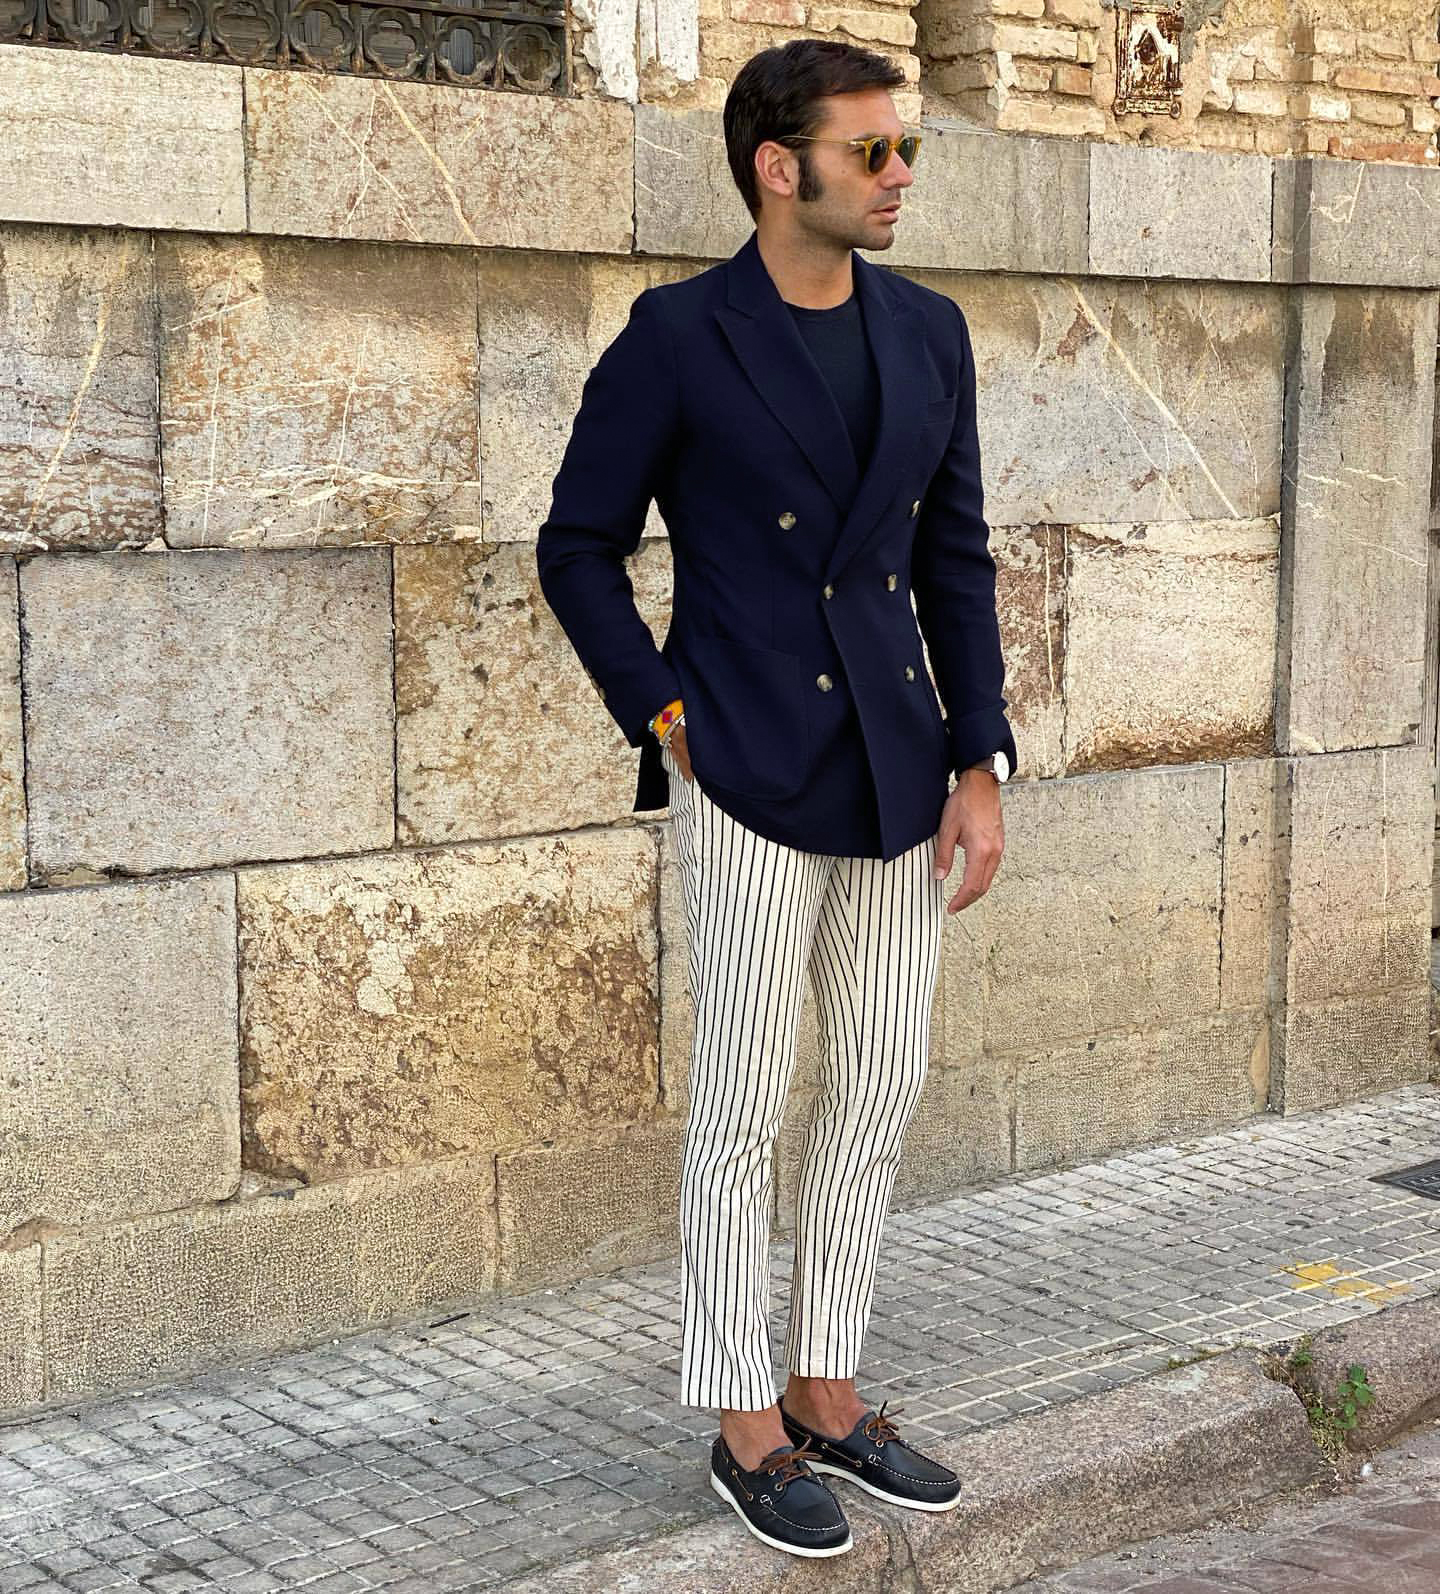 smart-casual attire: navy blazer, navy boat shoes and black-striped chinos